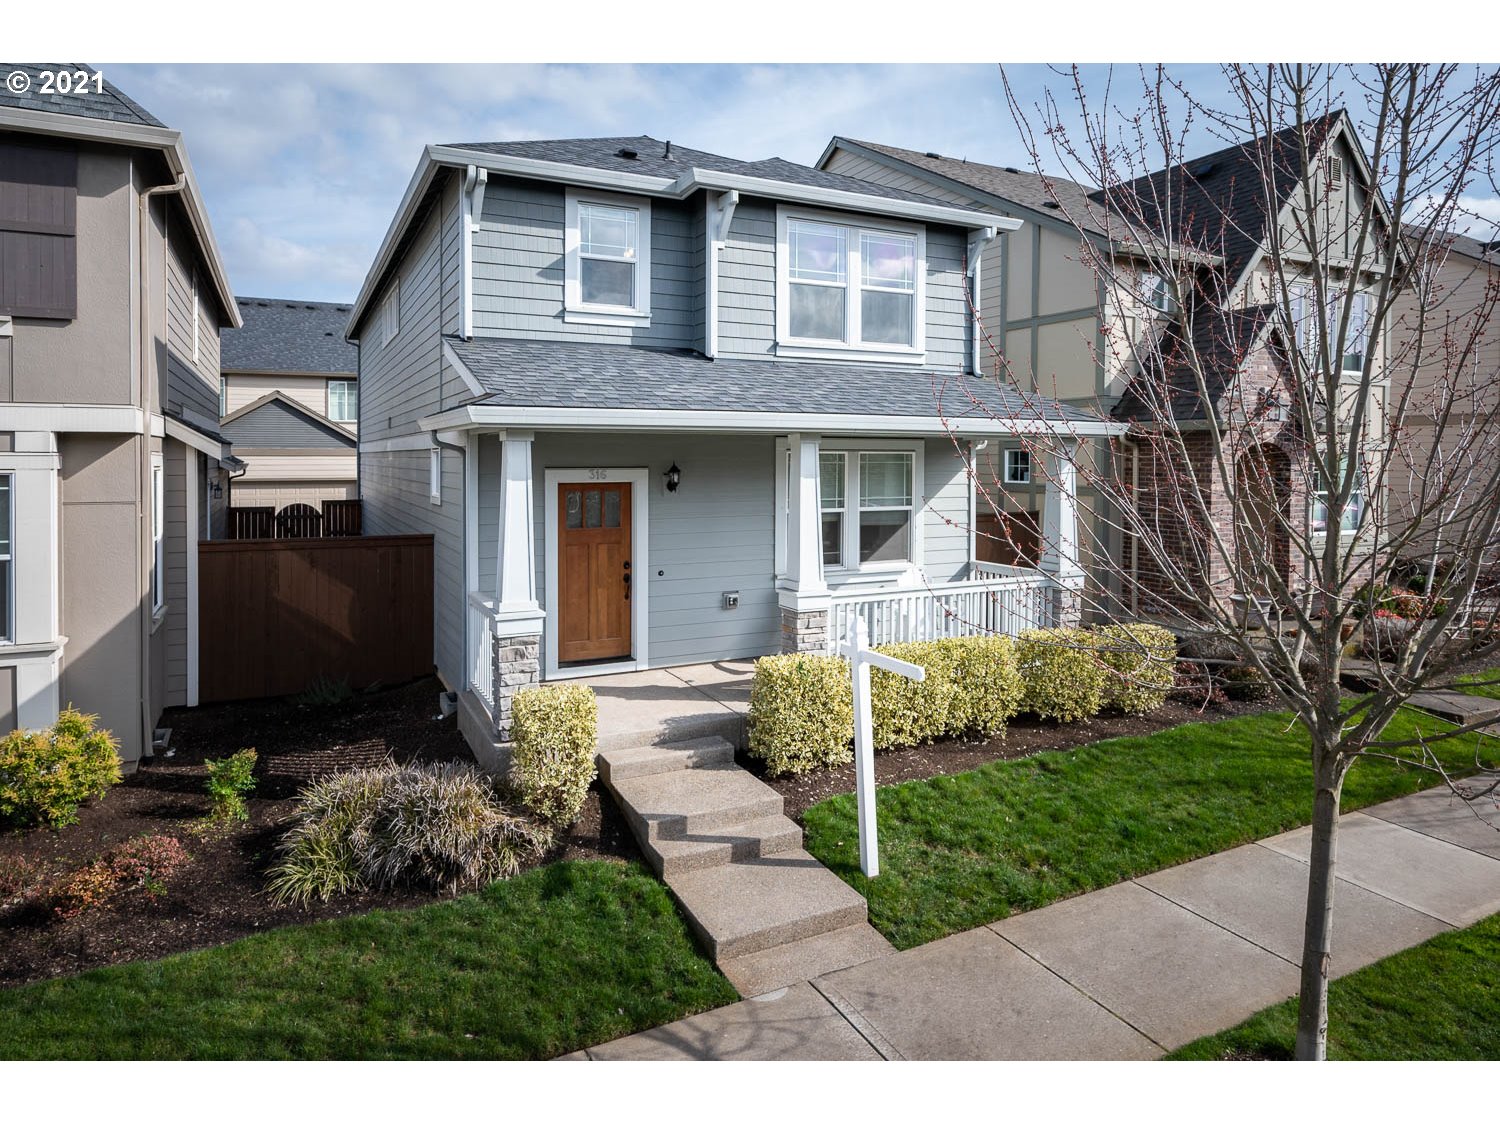 316 SW 203RD TER (1 of 24)